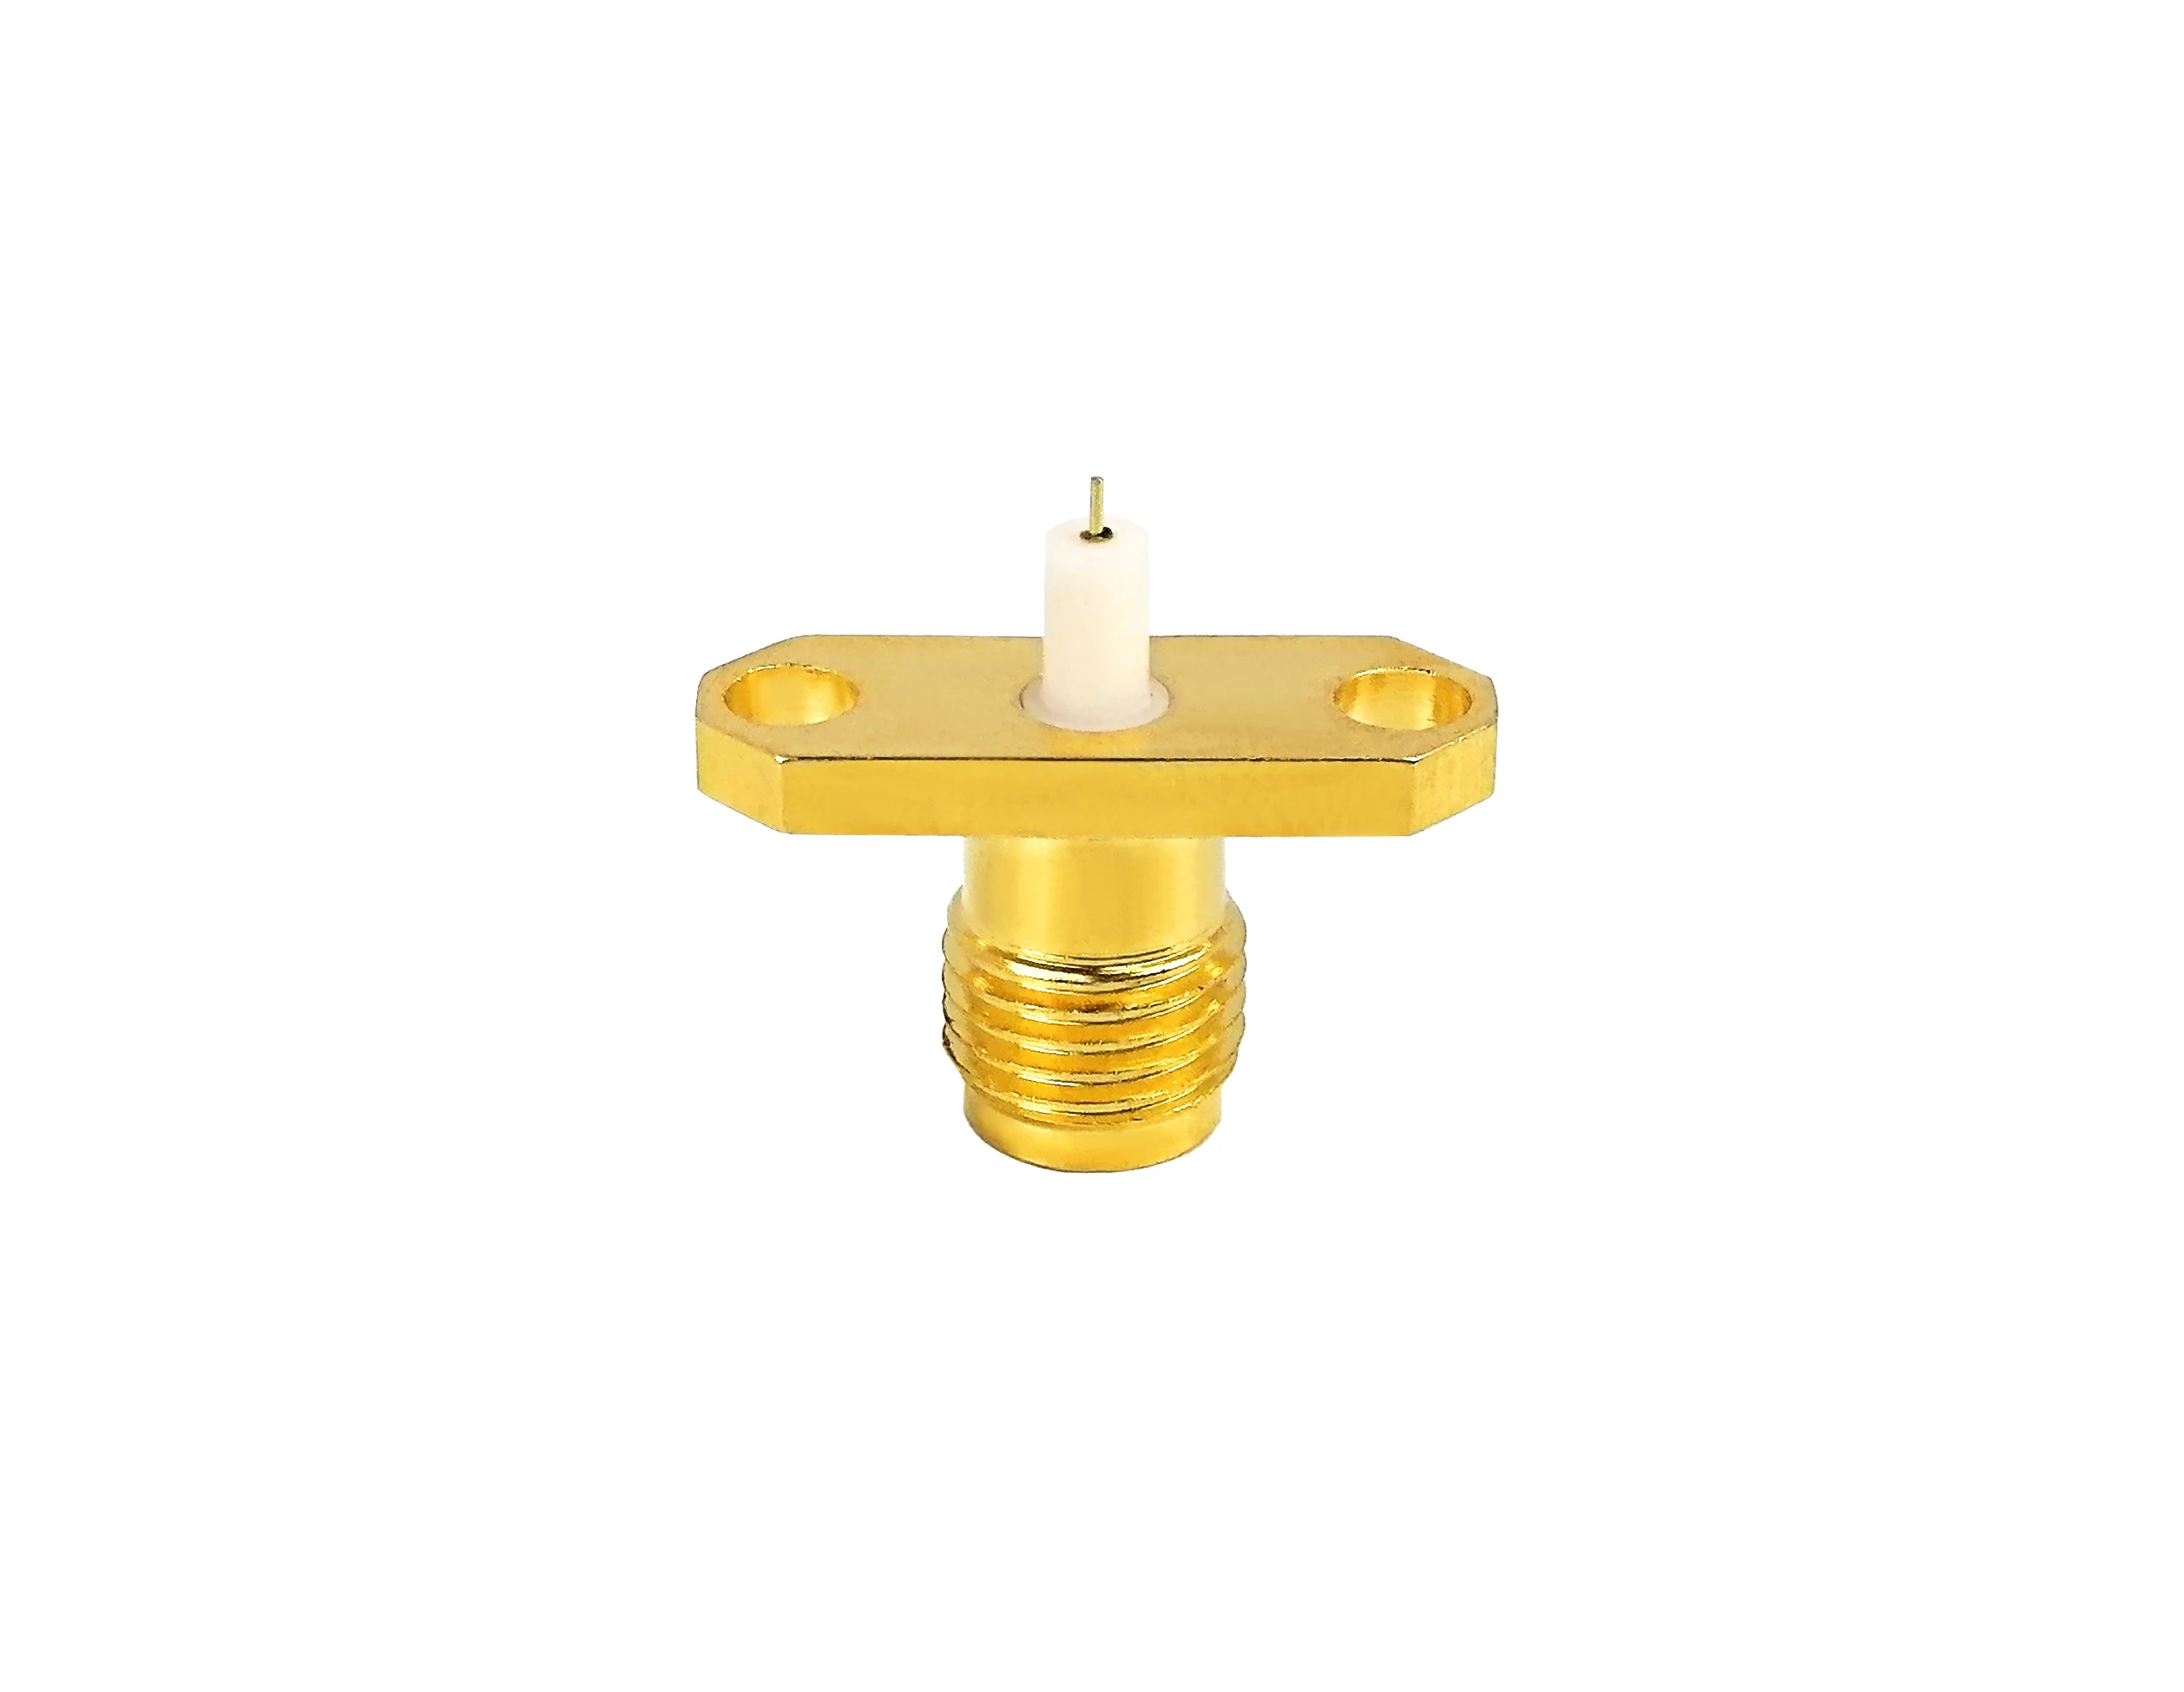 SMA Gold plated  sma female jack 2 hole flange pcb conector rf coaxial connectors factory